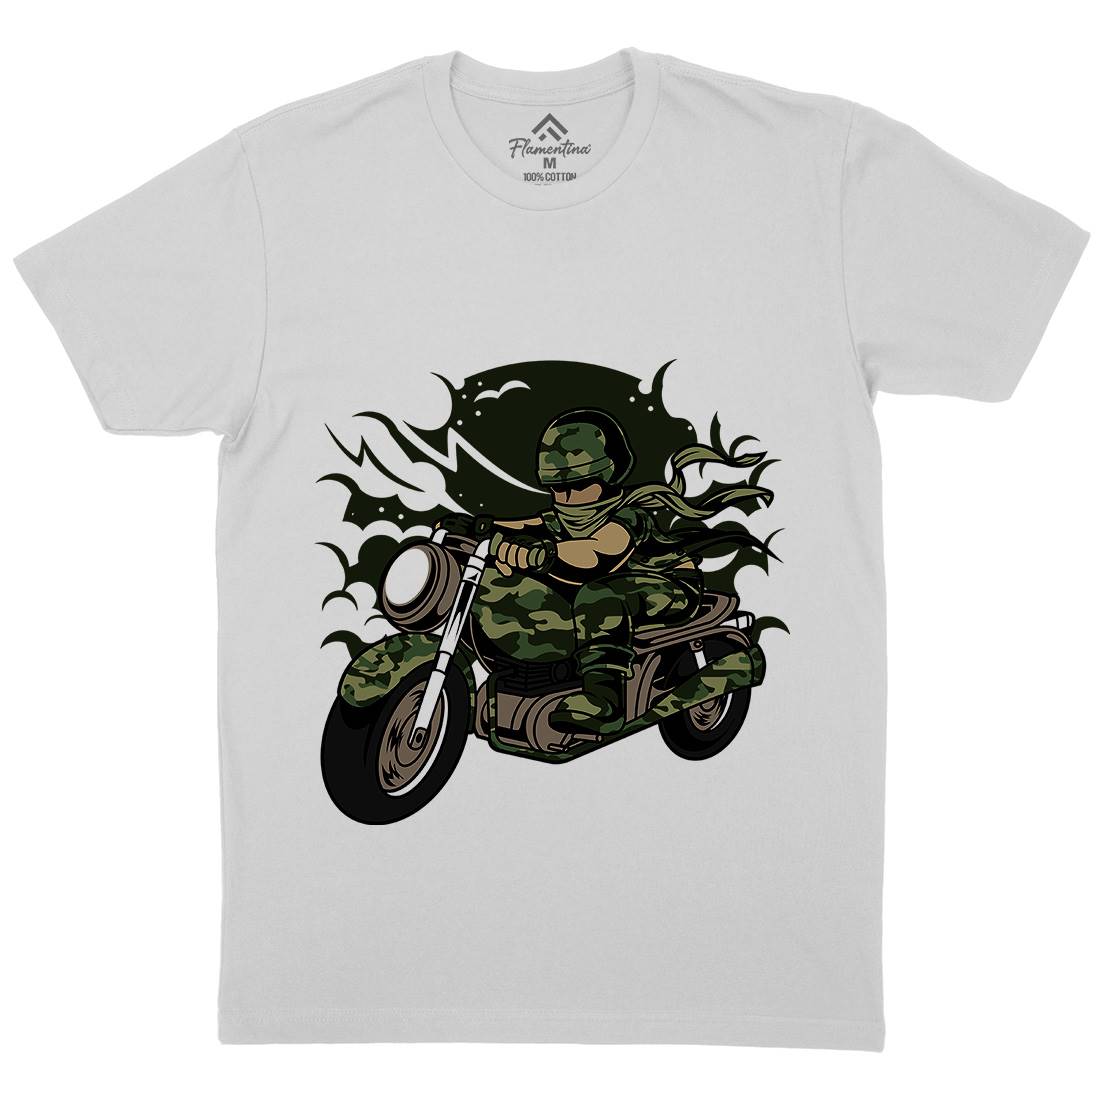 Motorcycle Ride Mens Crew Neck T-Shirt Army C306